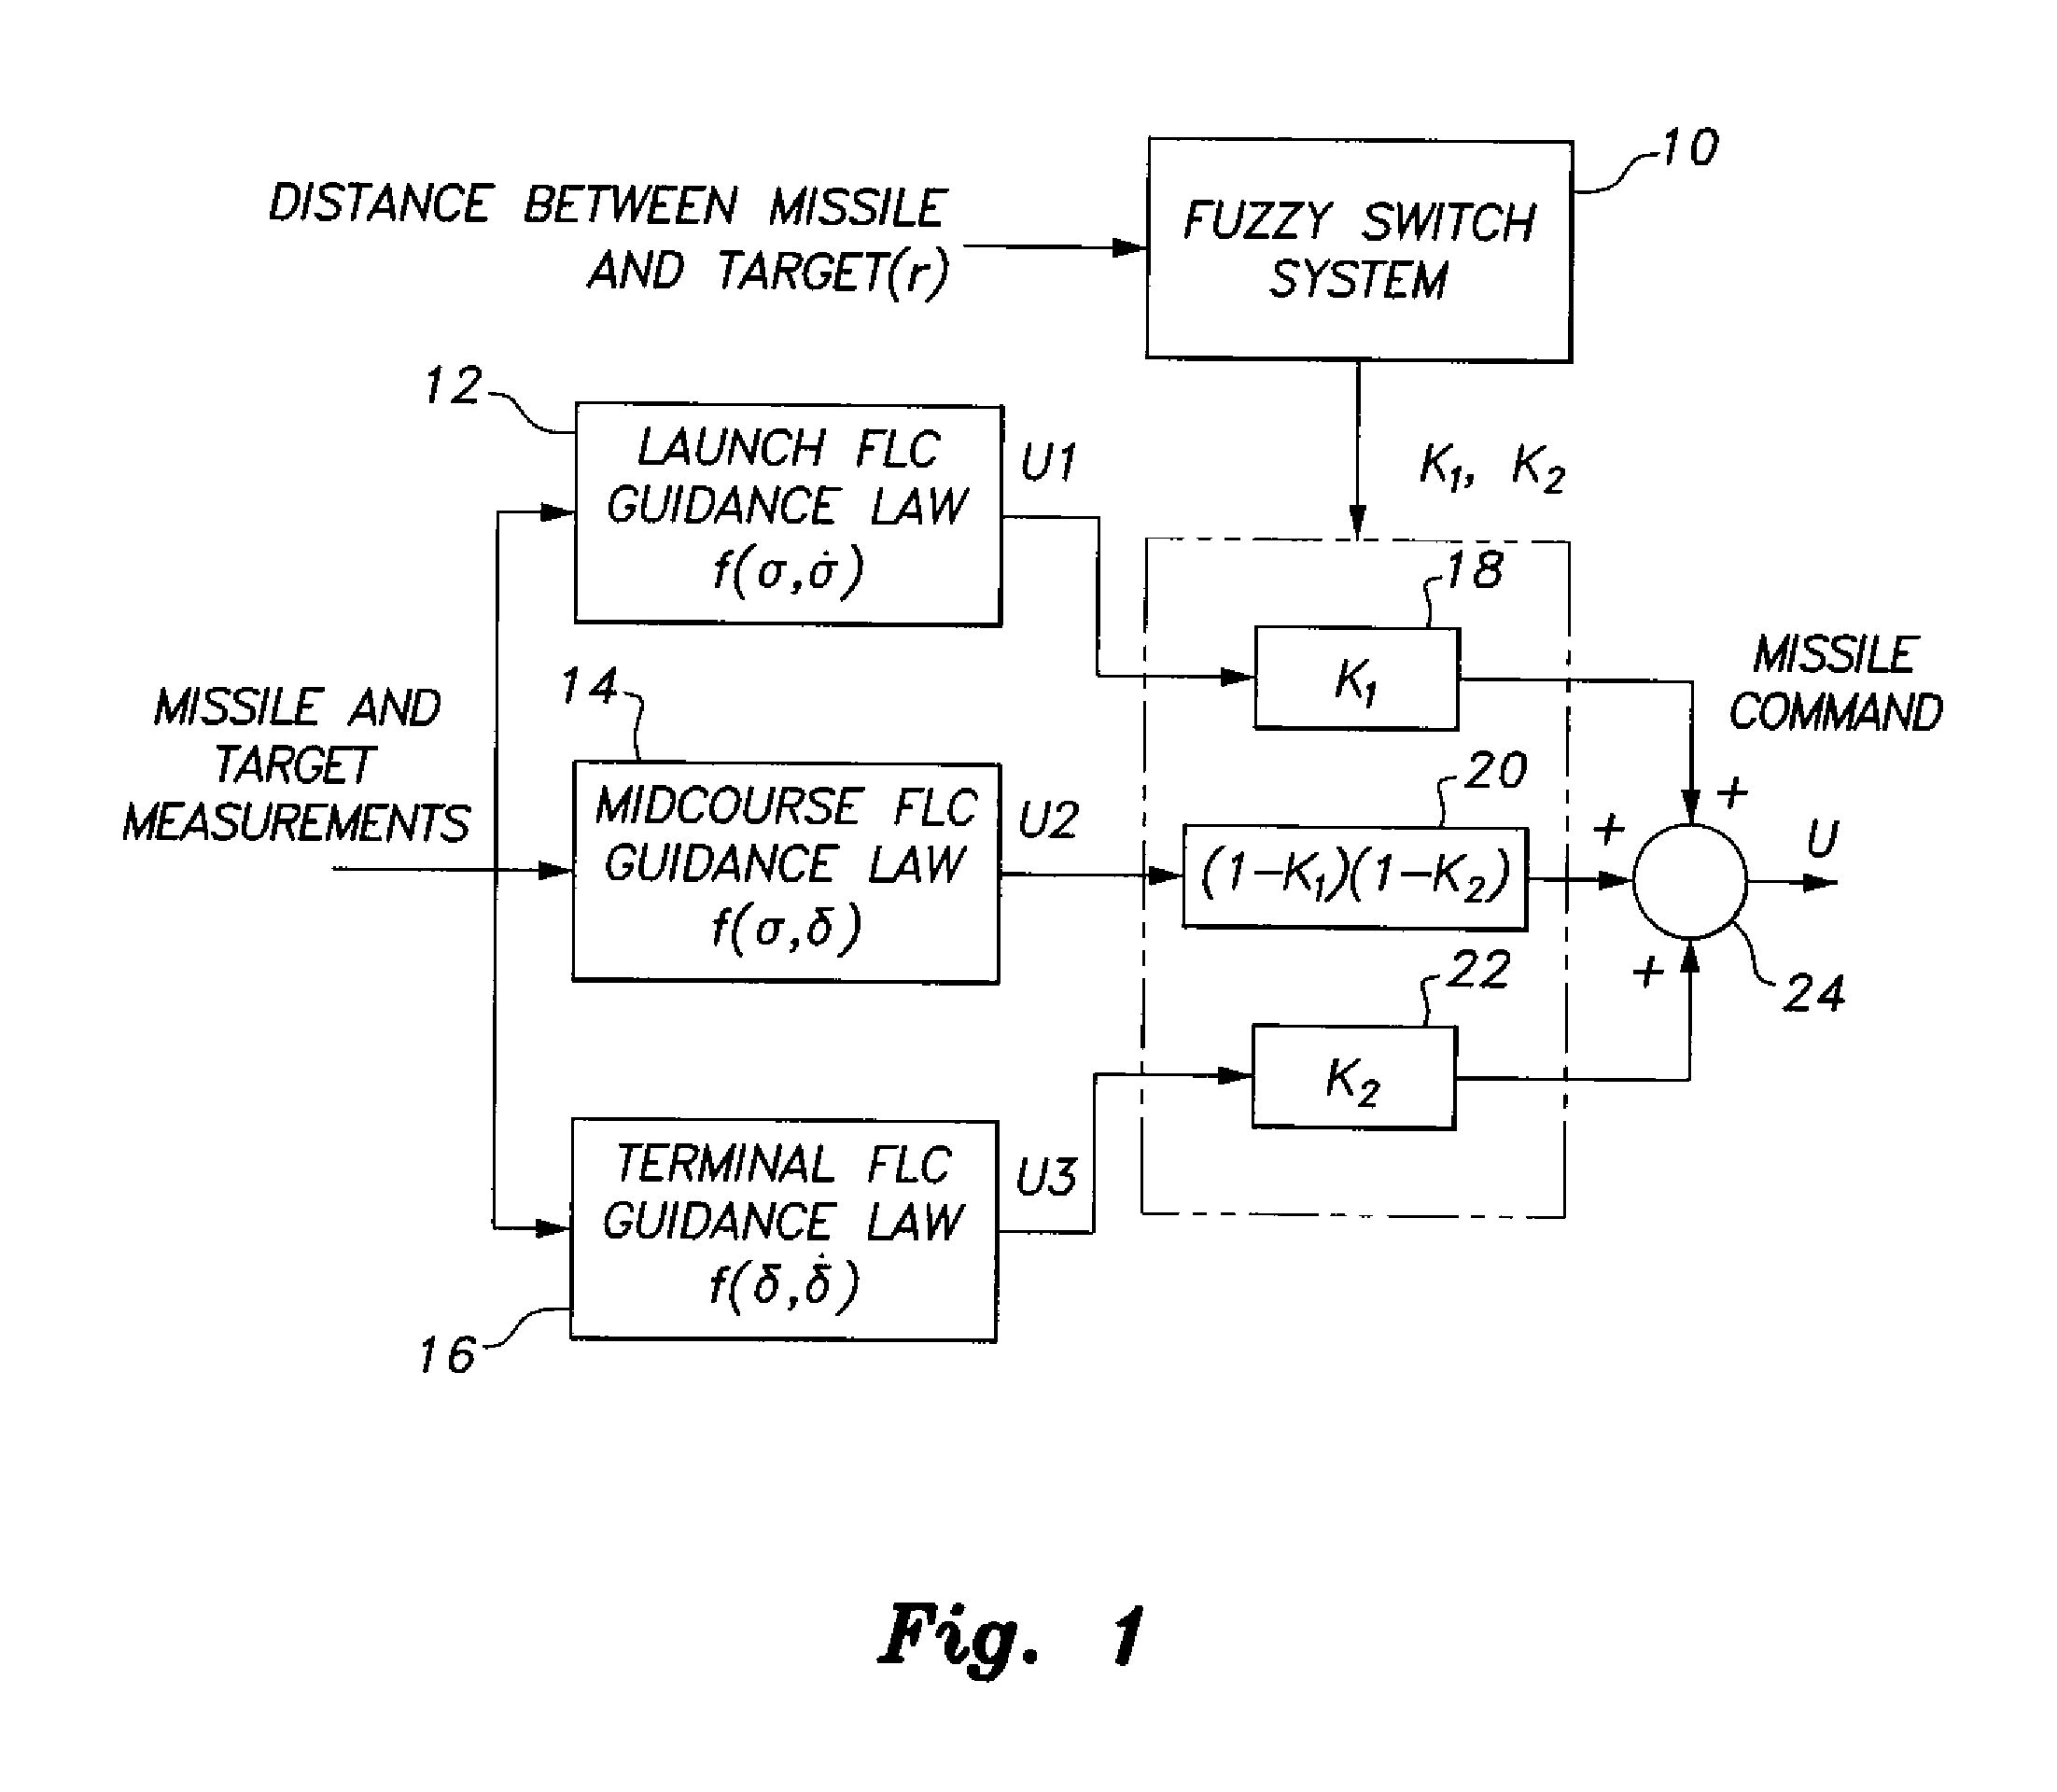 Method of generating an  integrated fuzzy-based guidance law for aerodynamic missiles